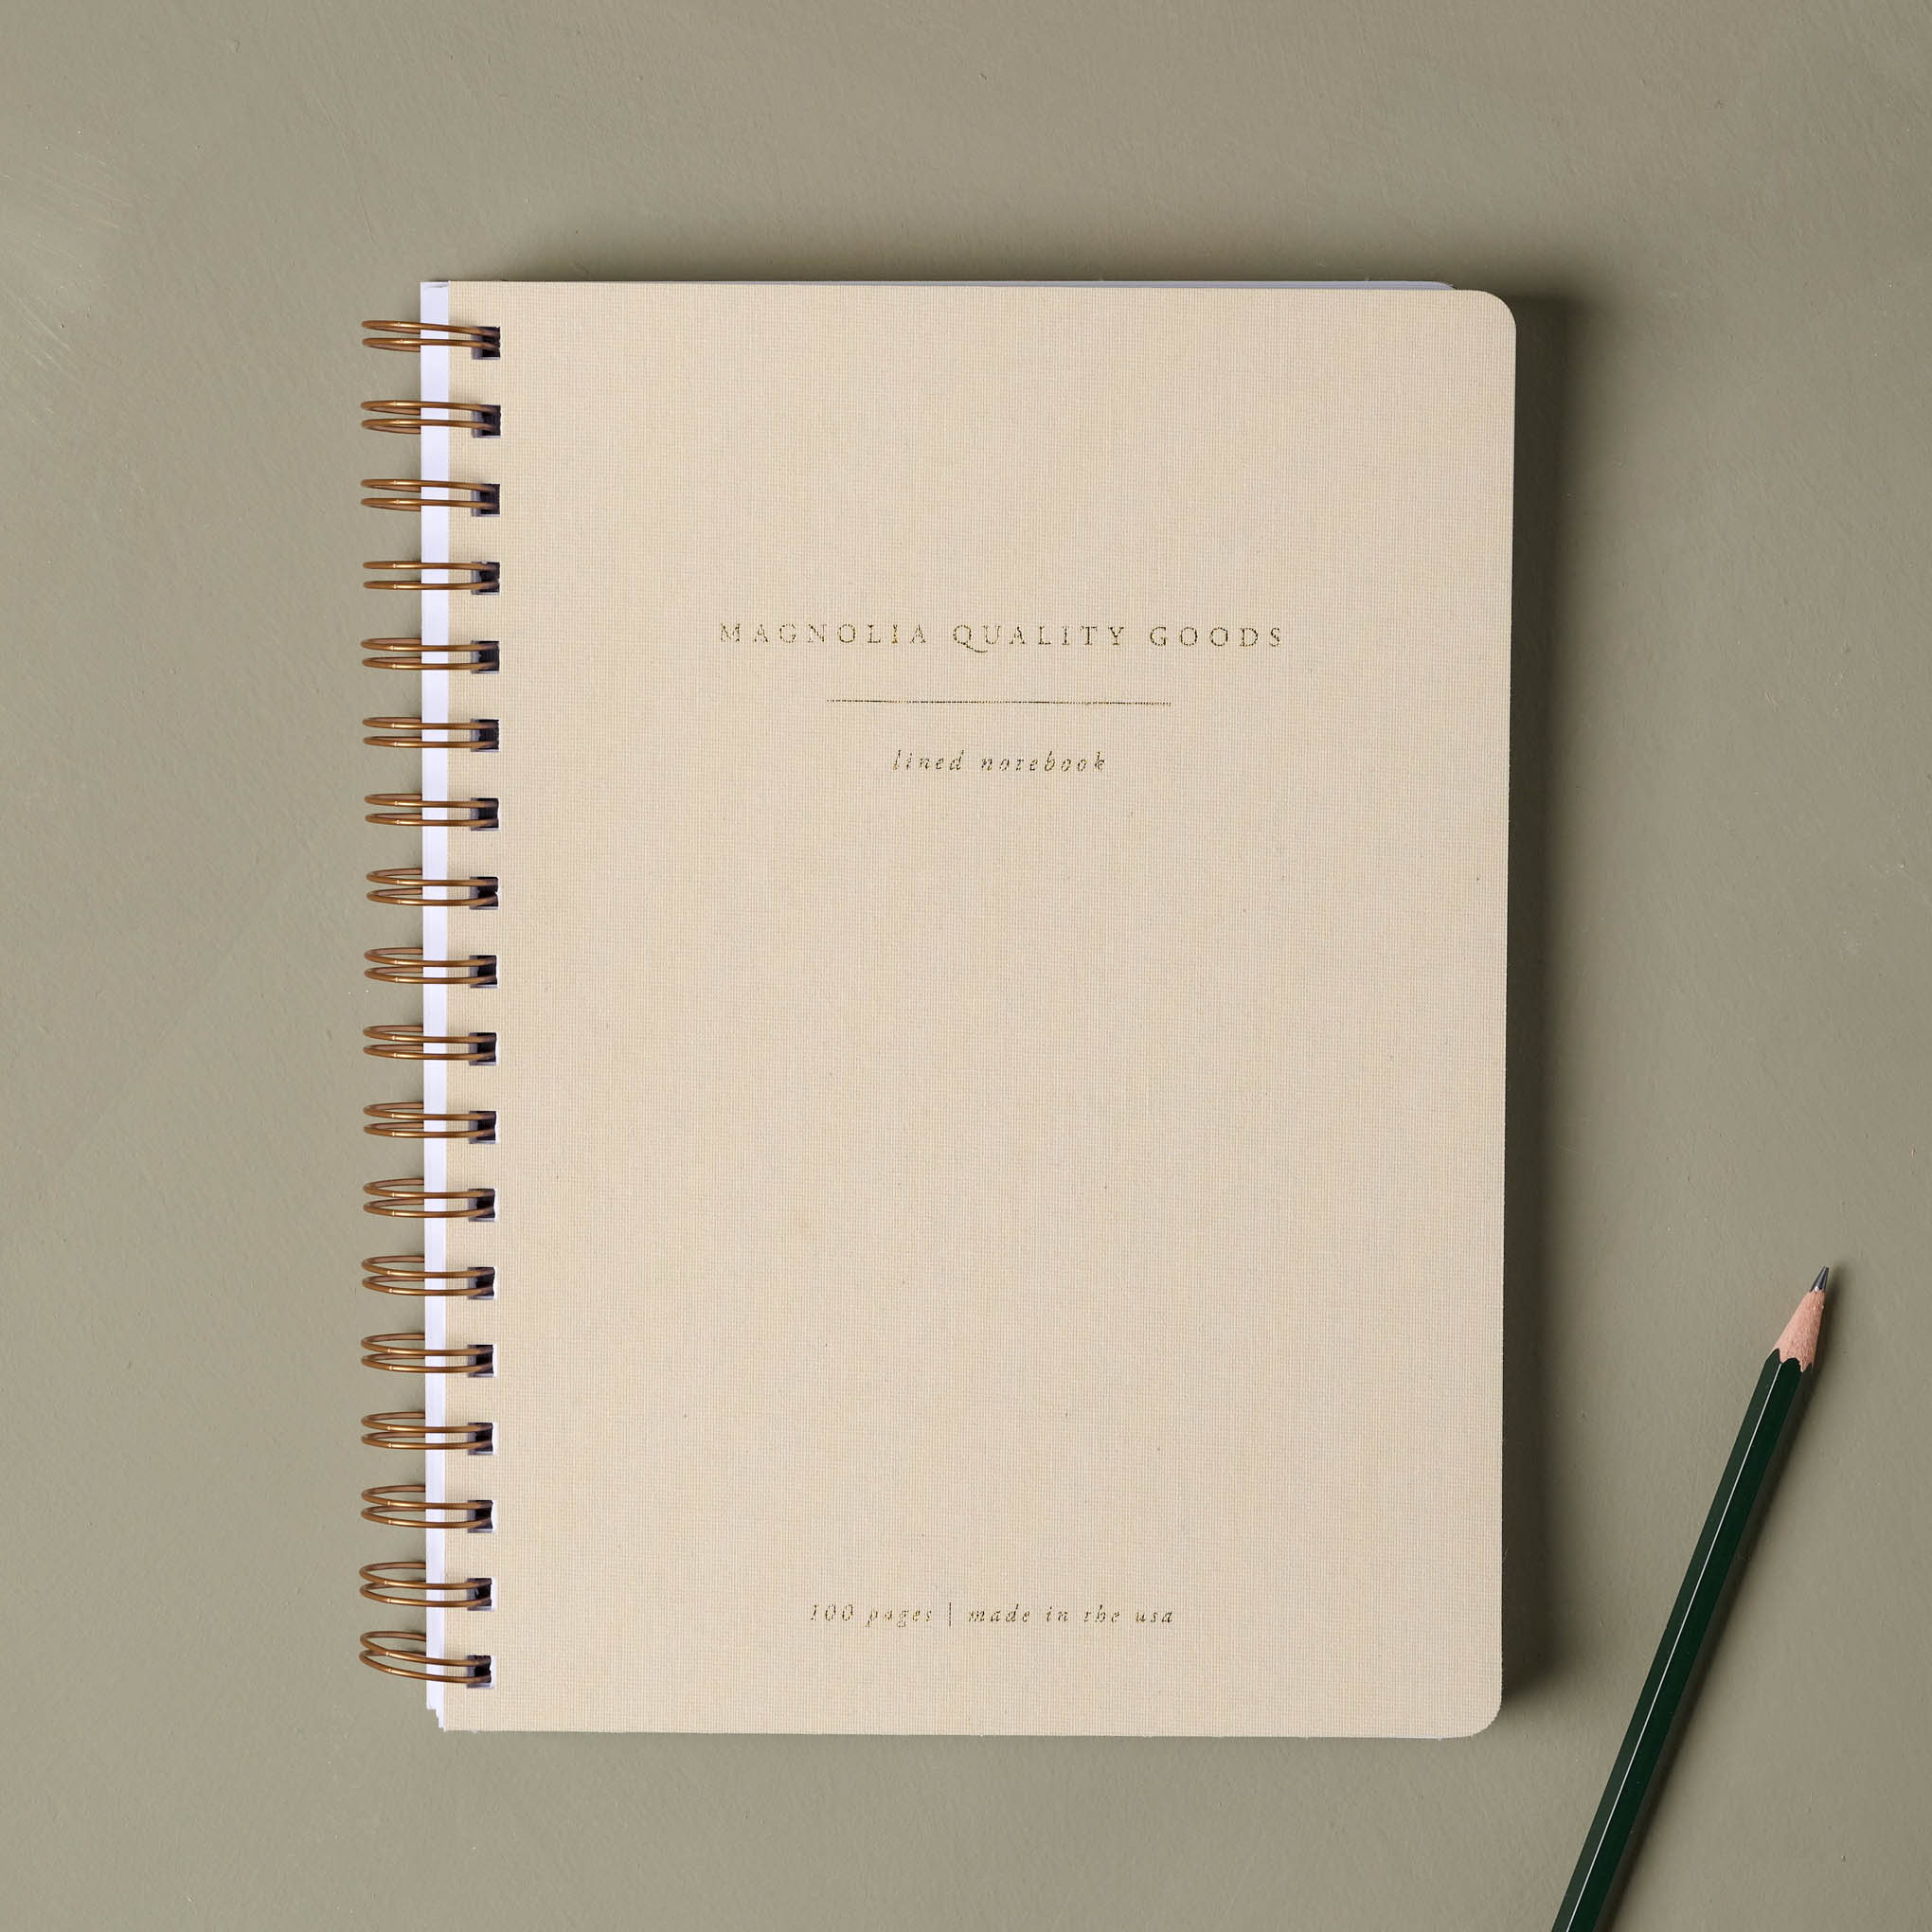 Magnolia Lined Spiral Notebook On sale for $21.00, discounted from $30.00